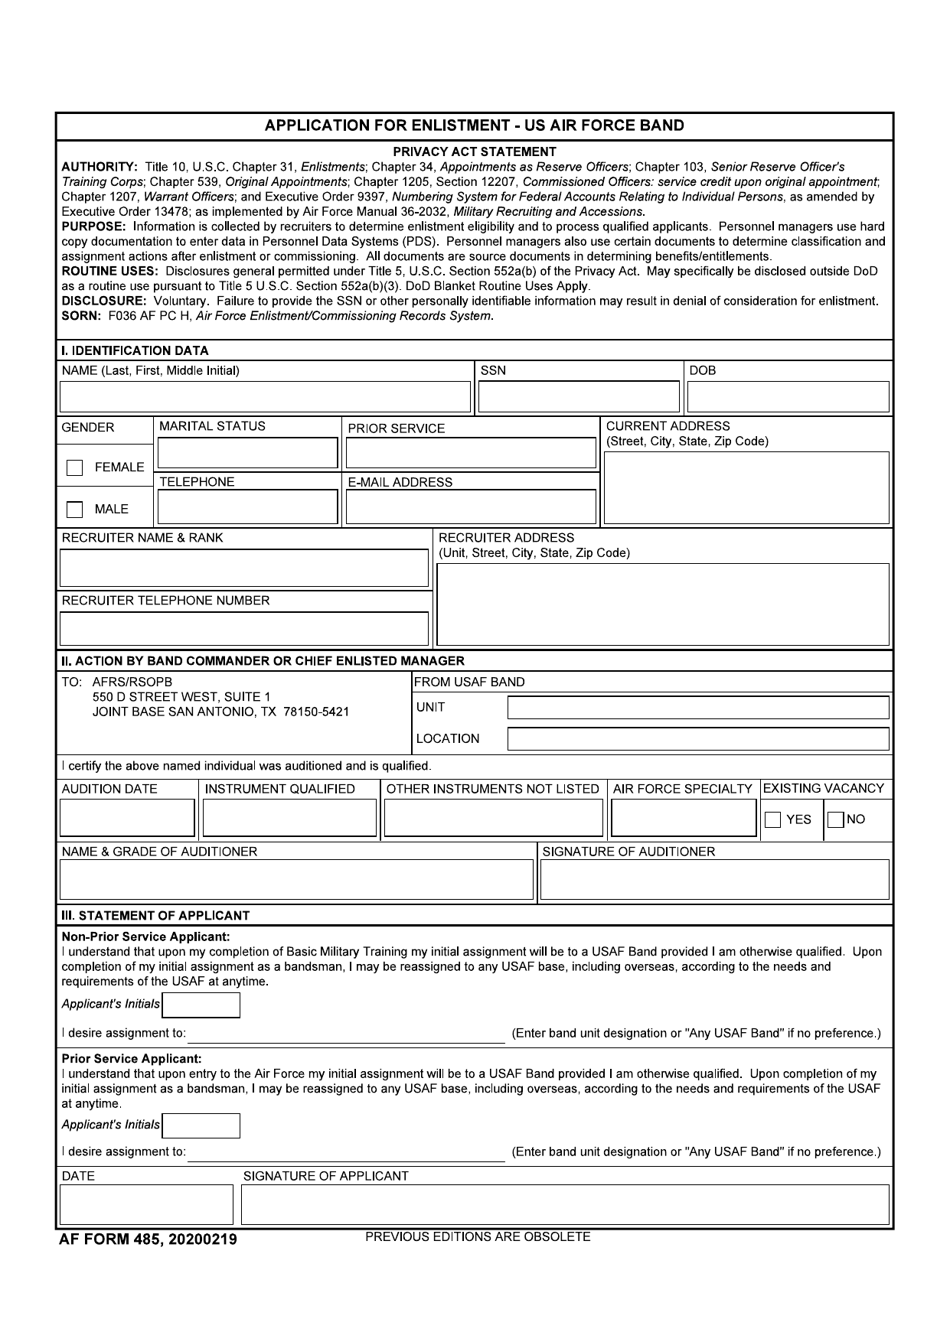 AF Form 485 Application for Enlistment - US Air Force Band, Page 1